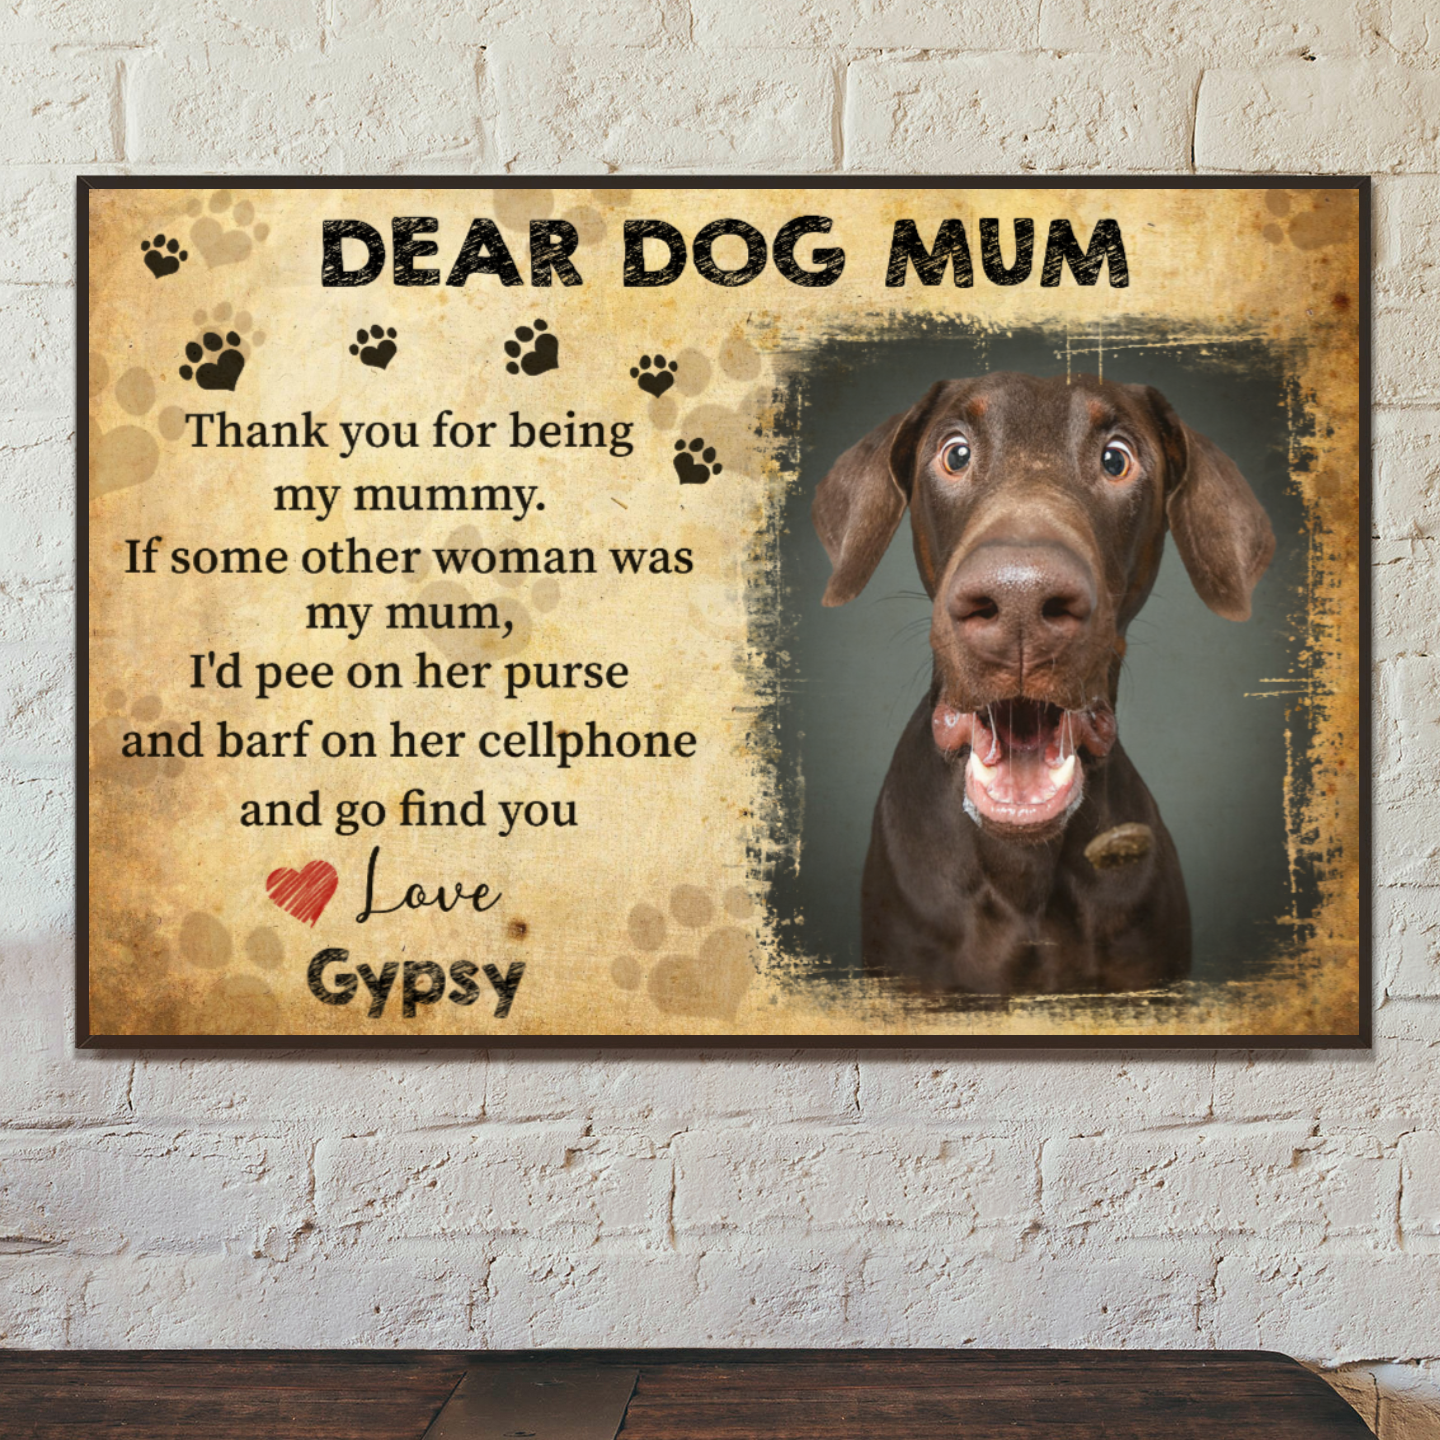 Ciaocustom Poster/Framed Canvas/Unframed Canvas, Custom Dog Image/Name/Background/Text, Gifts For Dog Lovers, Dear Dog Mum